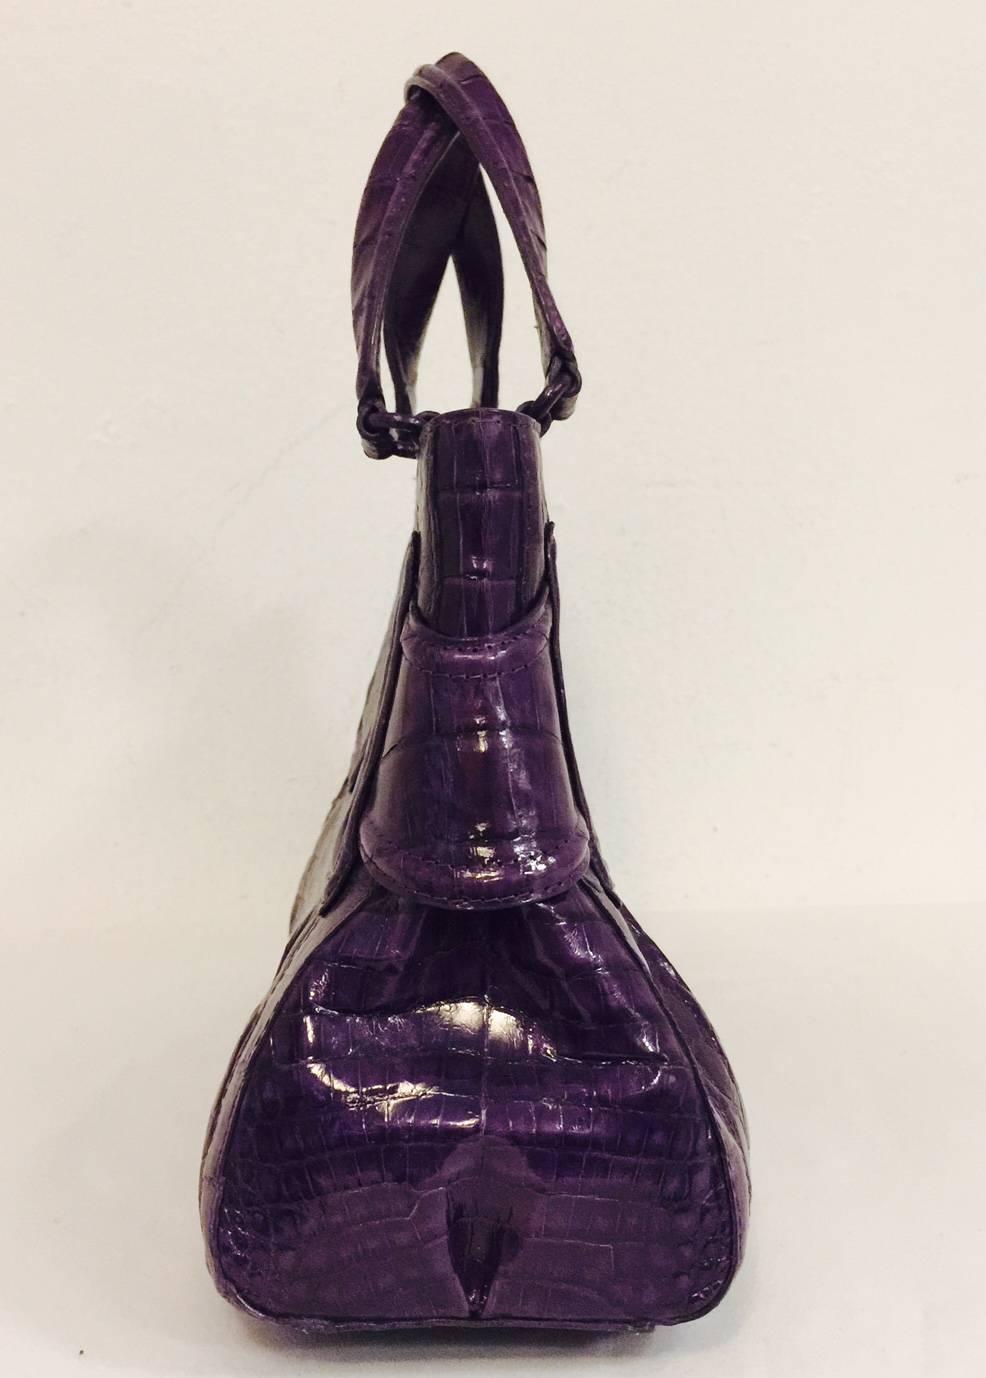 Nancy Gonzalez Aubergine Crocodile Structured Hand Bag is a must for all devotees of her designs! Crafted in Colombia, bag features ultra-luxurious crocodile in a regal shade of purple. Double flat straps are attached to bag with crocodile covered